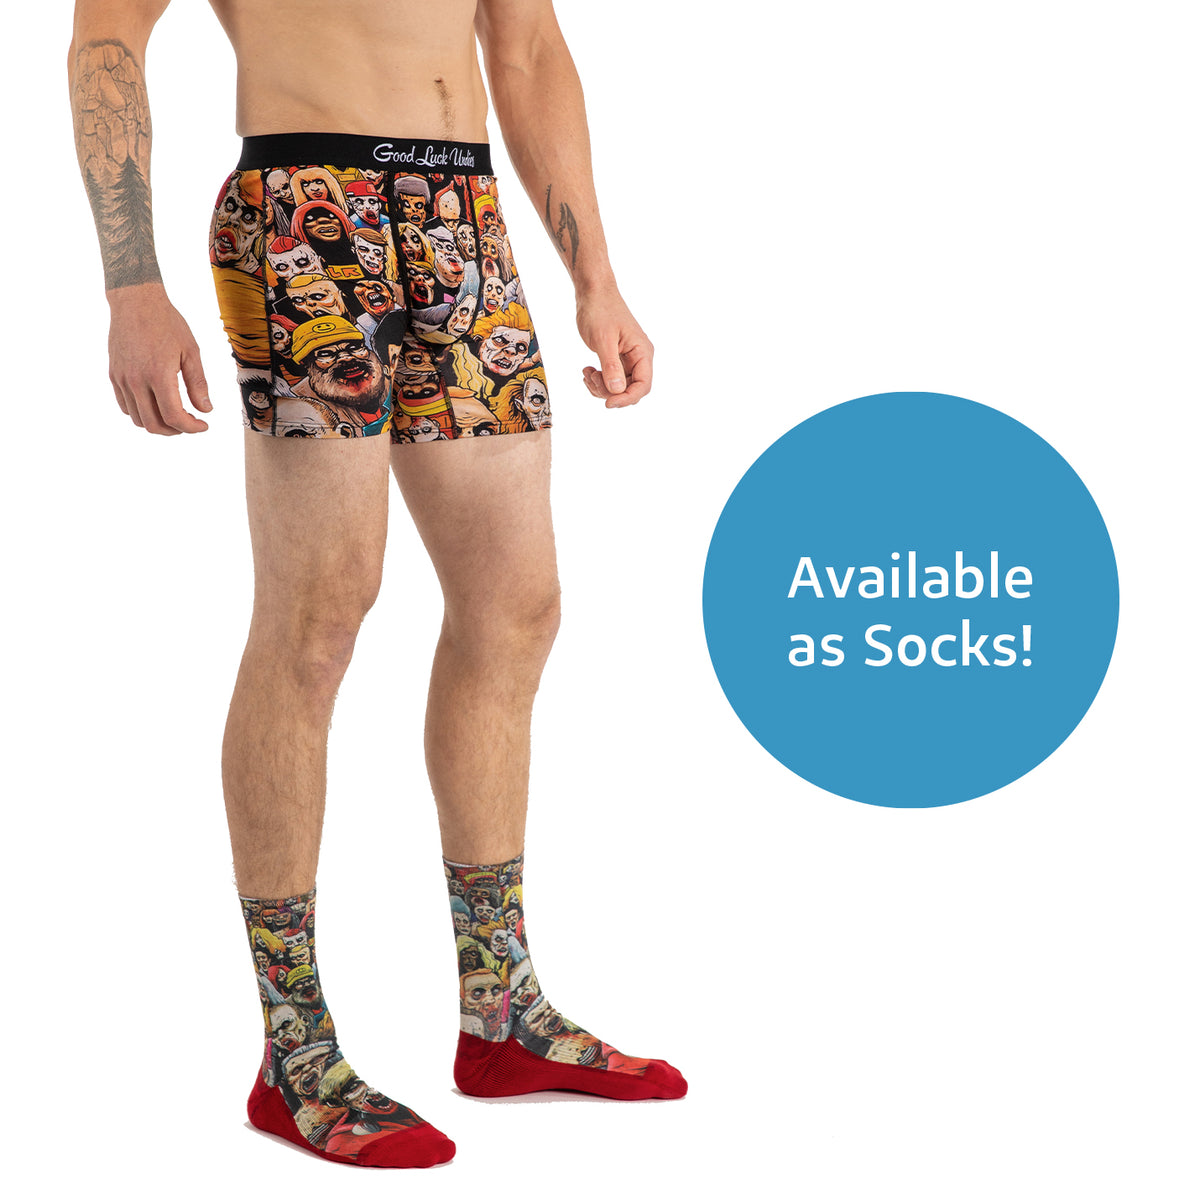 MYER - SUPER WEEKEND  Their old faithfuls looking a little worse for wear?  Gift a classic with 30% off men's sneakers, underwear, sleepwear and socks  >  Conditions and exclusions apply.